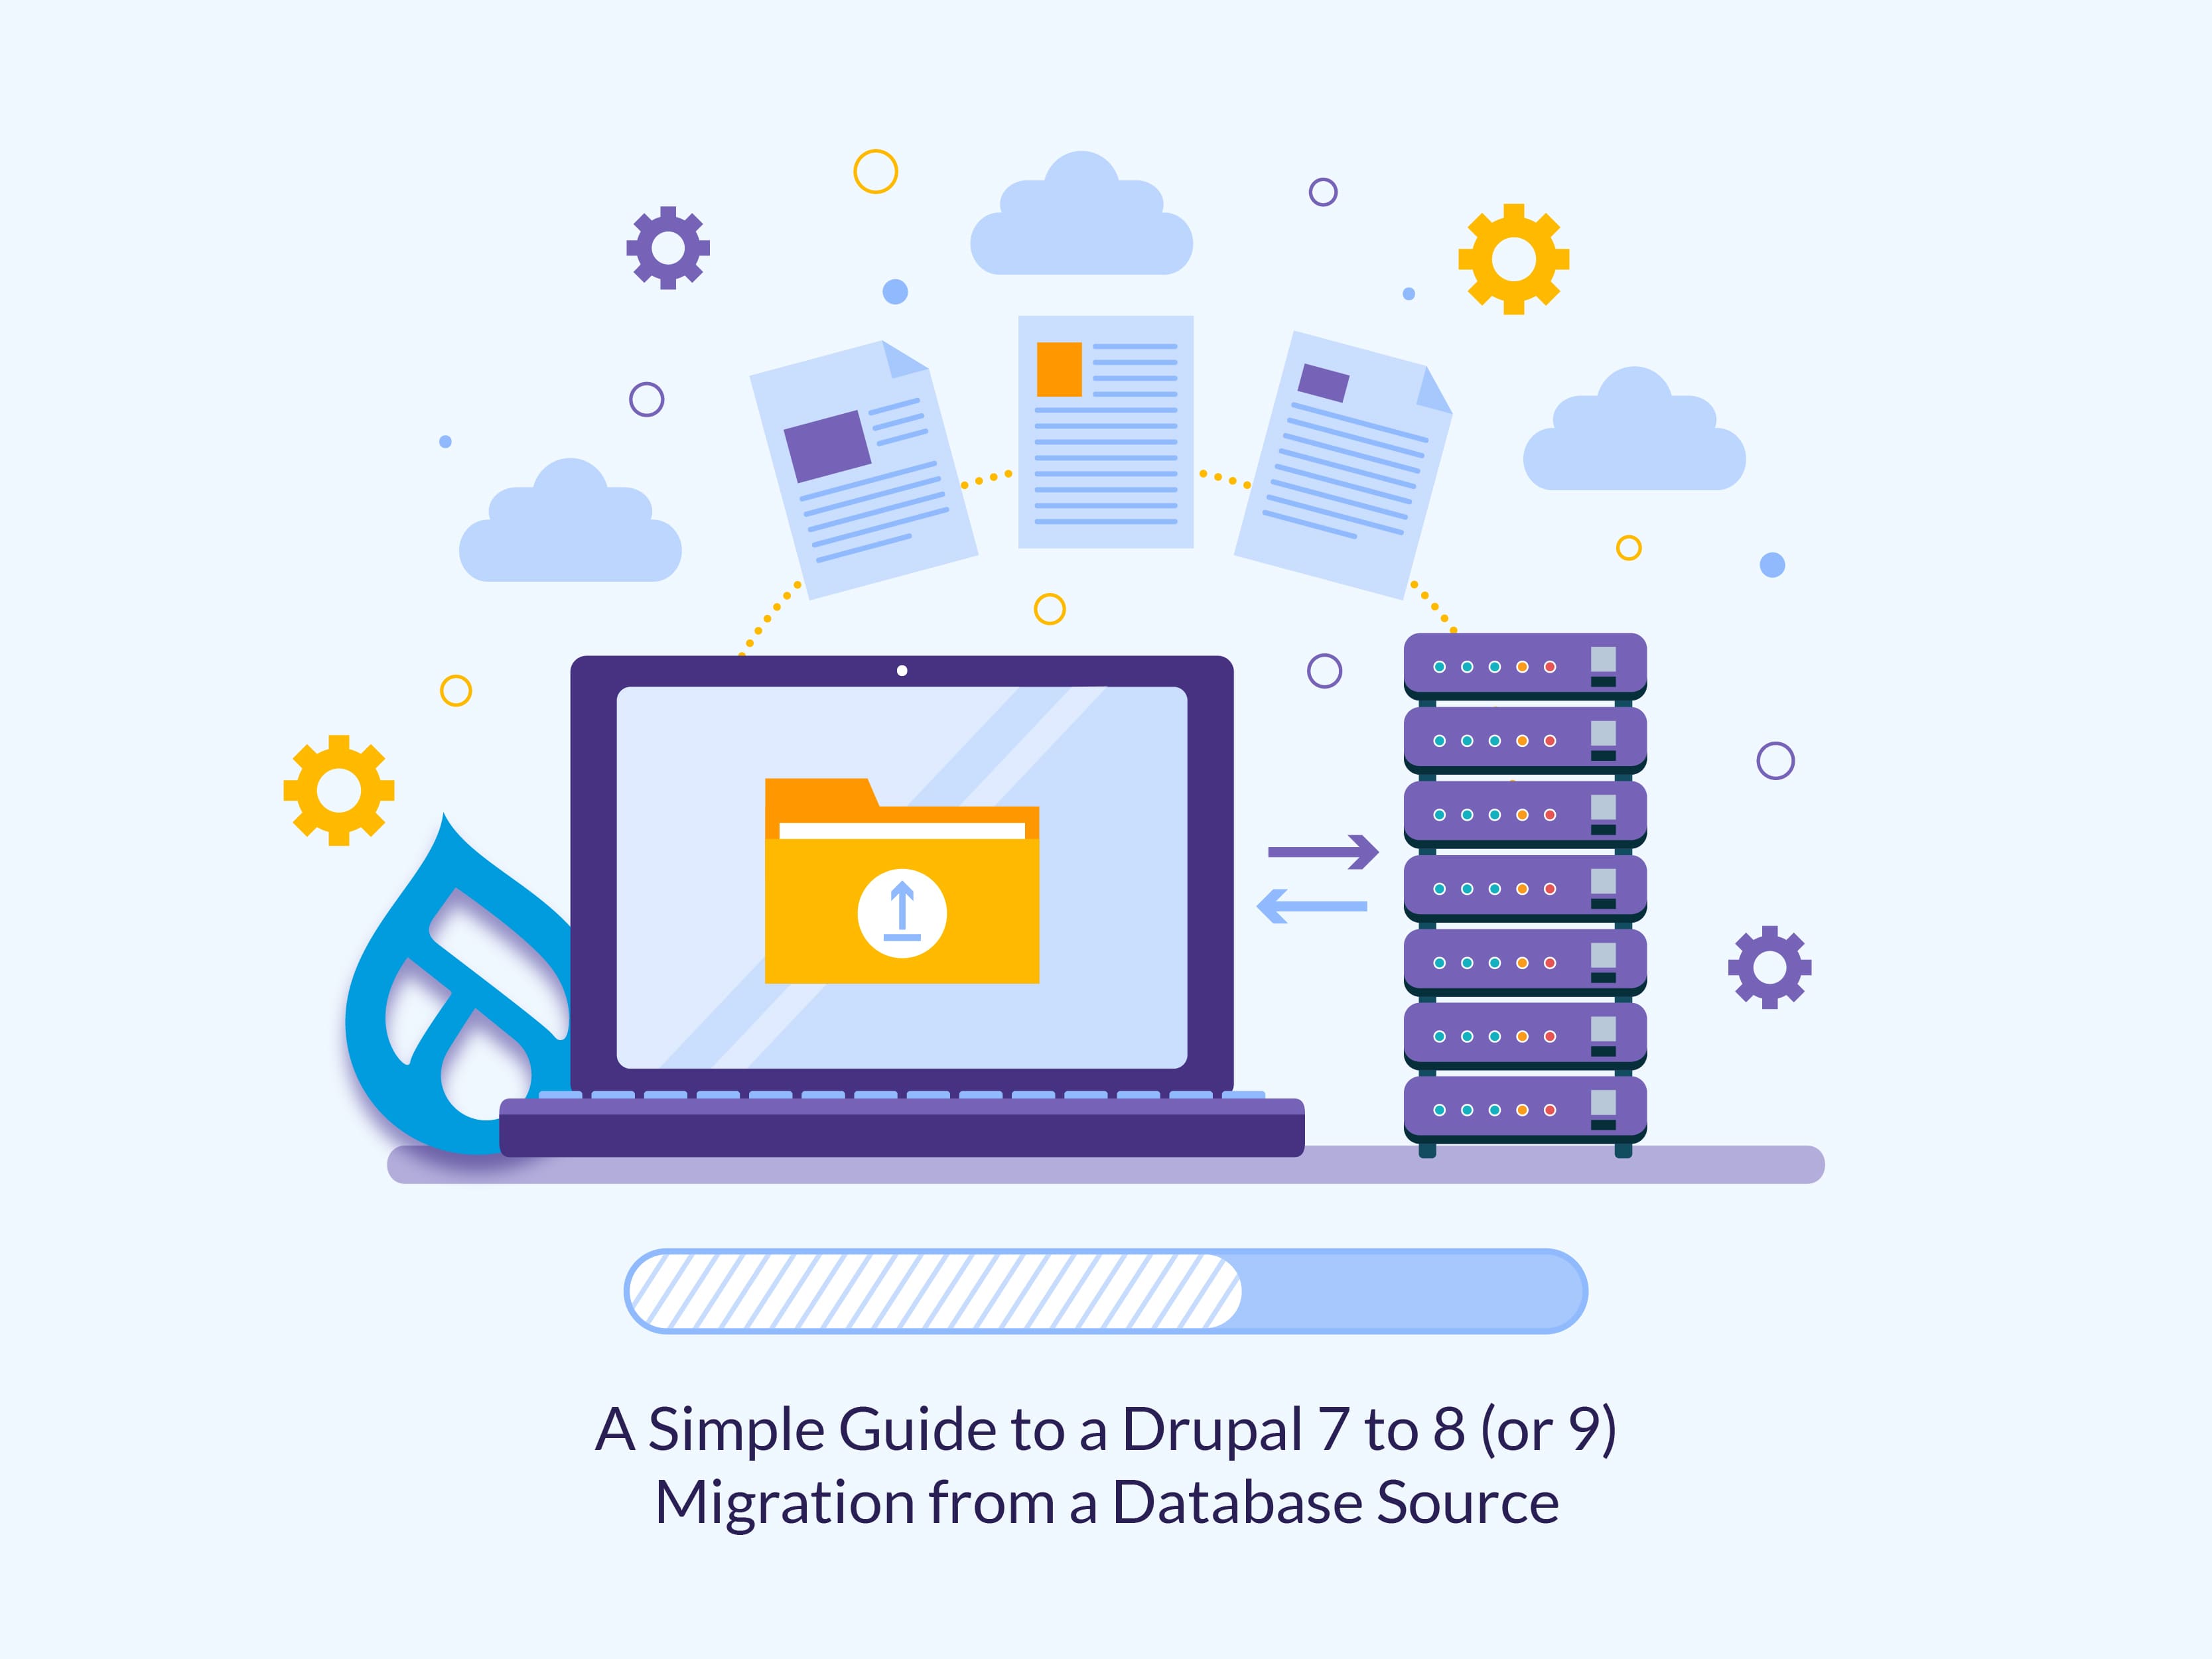 Migration from Database Source